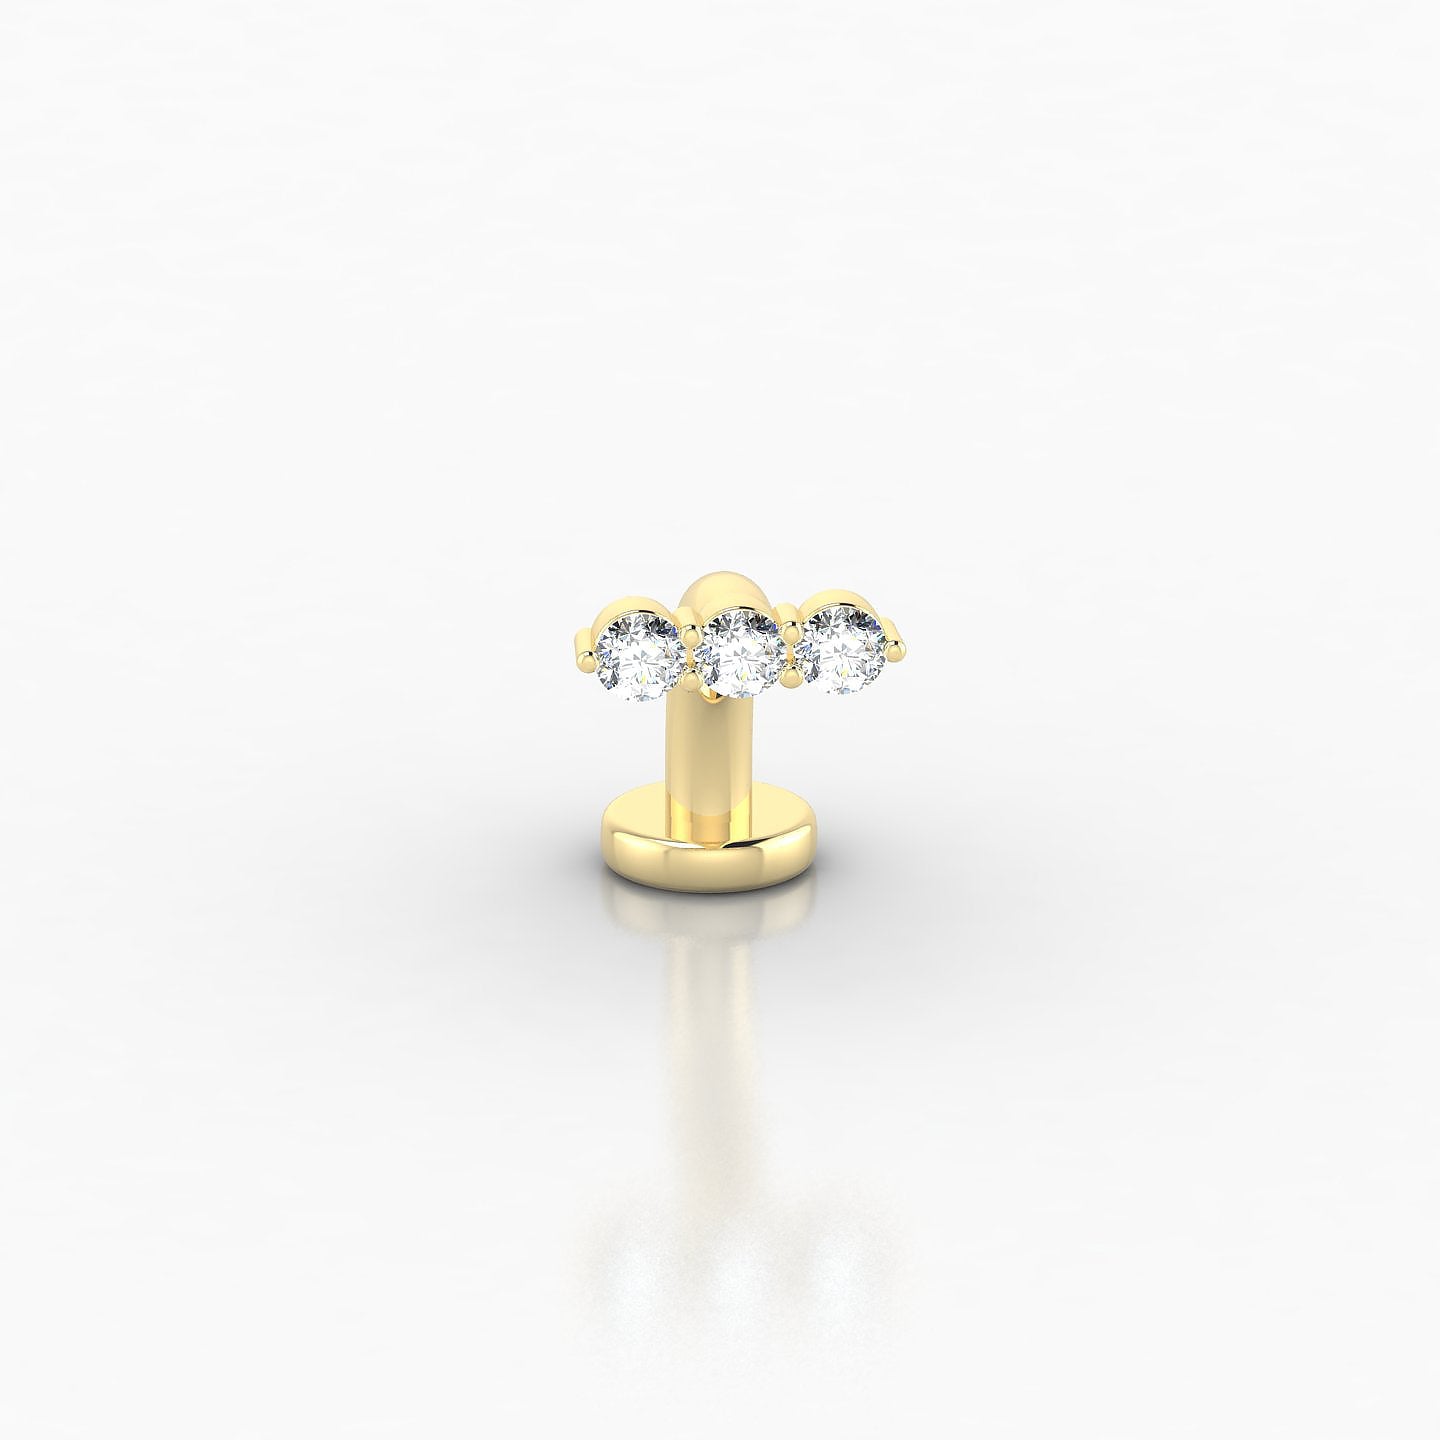 Ma'at | 18k Yellow Gold 8 mm 6.5 mm Trilogy Diamond Floating Navel Piercing